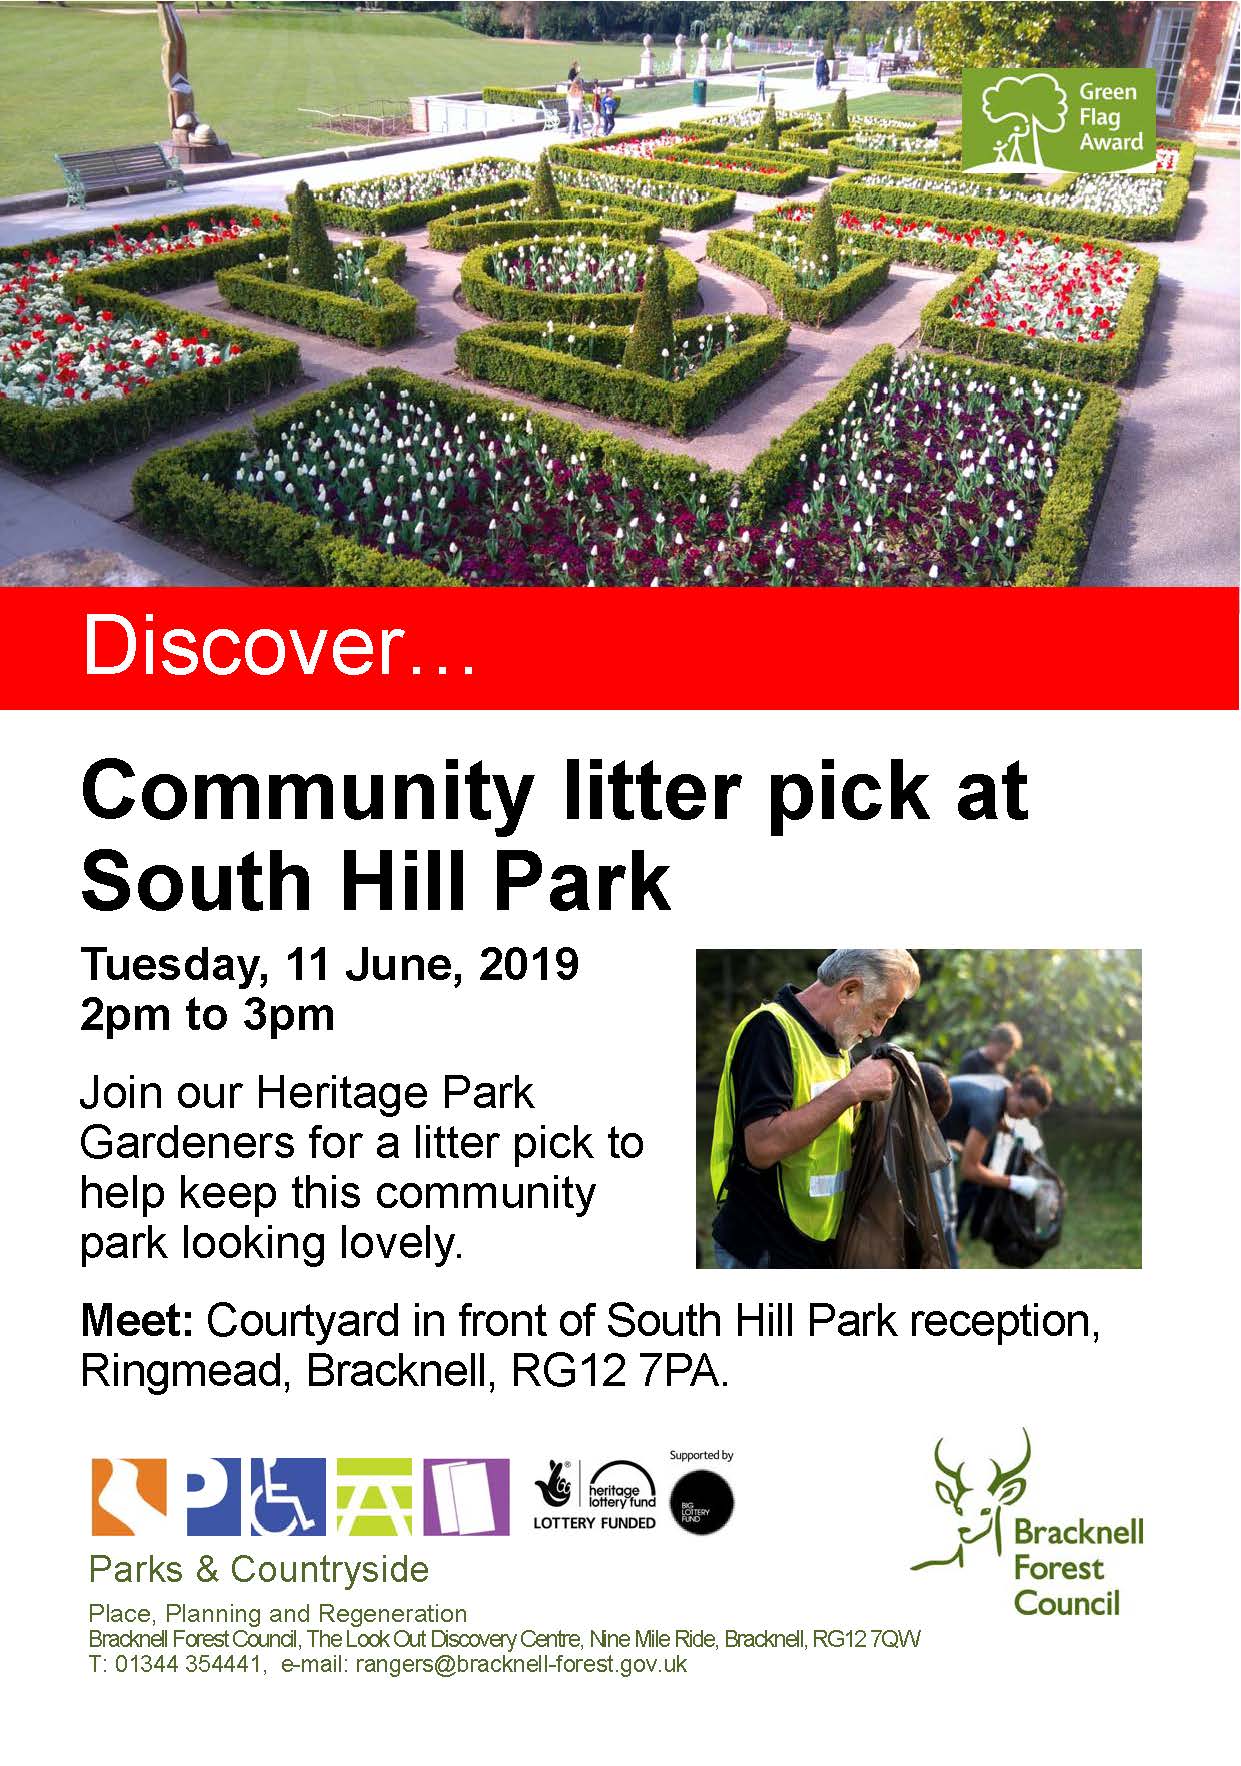 Community Litter Pick at South Hill Park